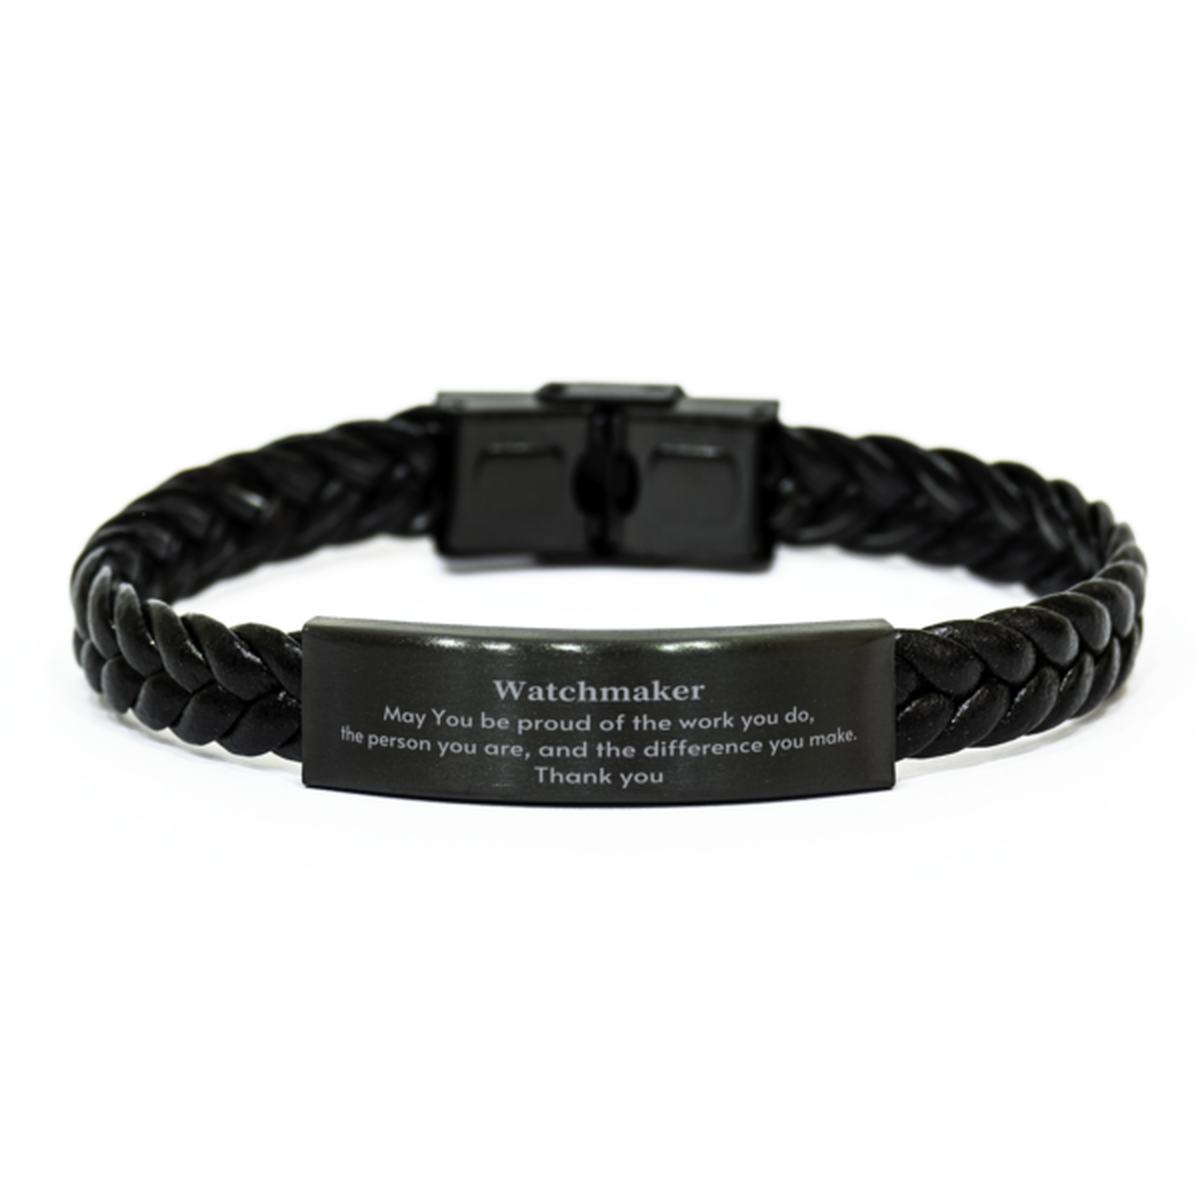 Heartwarming Braided Leather Bracelet Retirement Coworkers Gifts for Watchmaker, Watchmaker May You be proud of the work you do, the person you are Gifts for Boss Men Women Friends